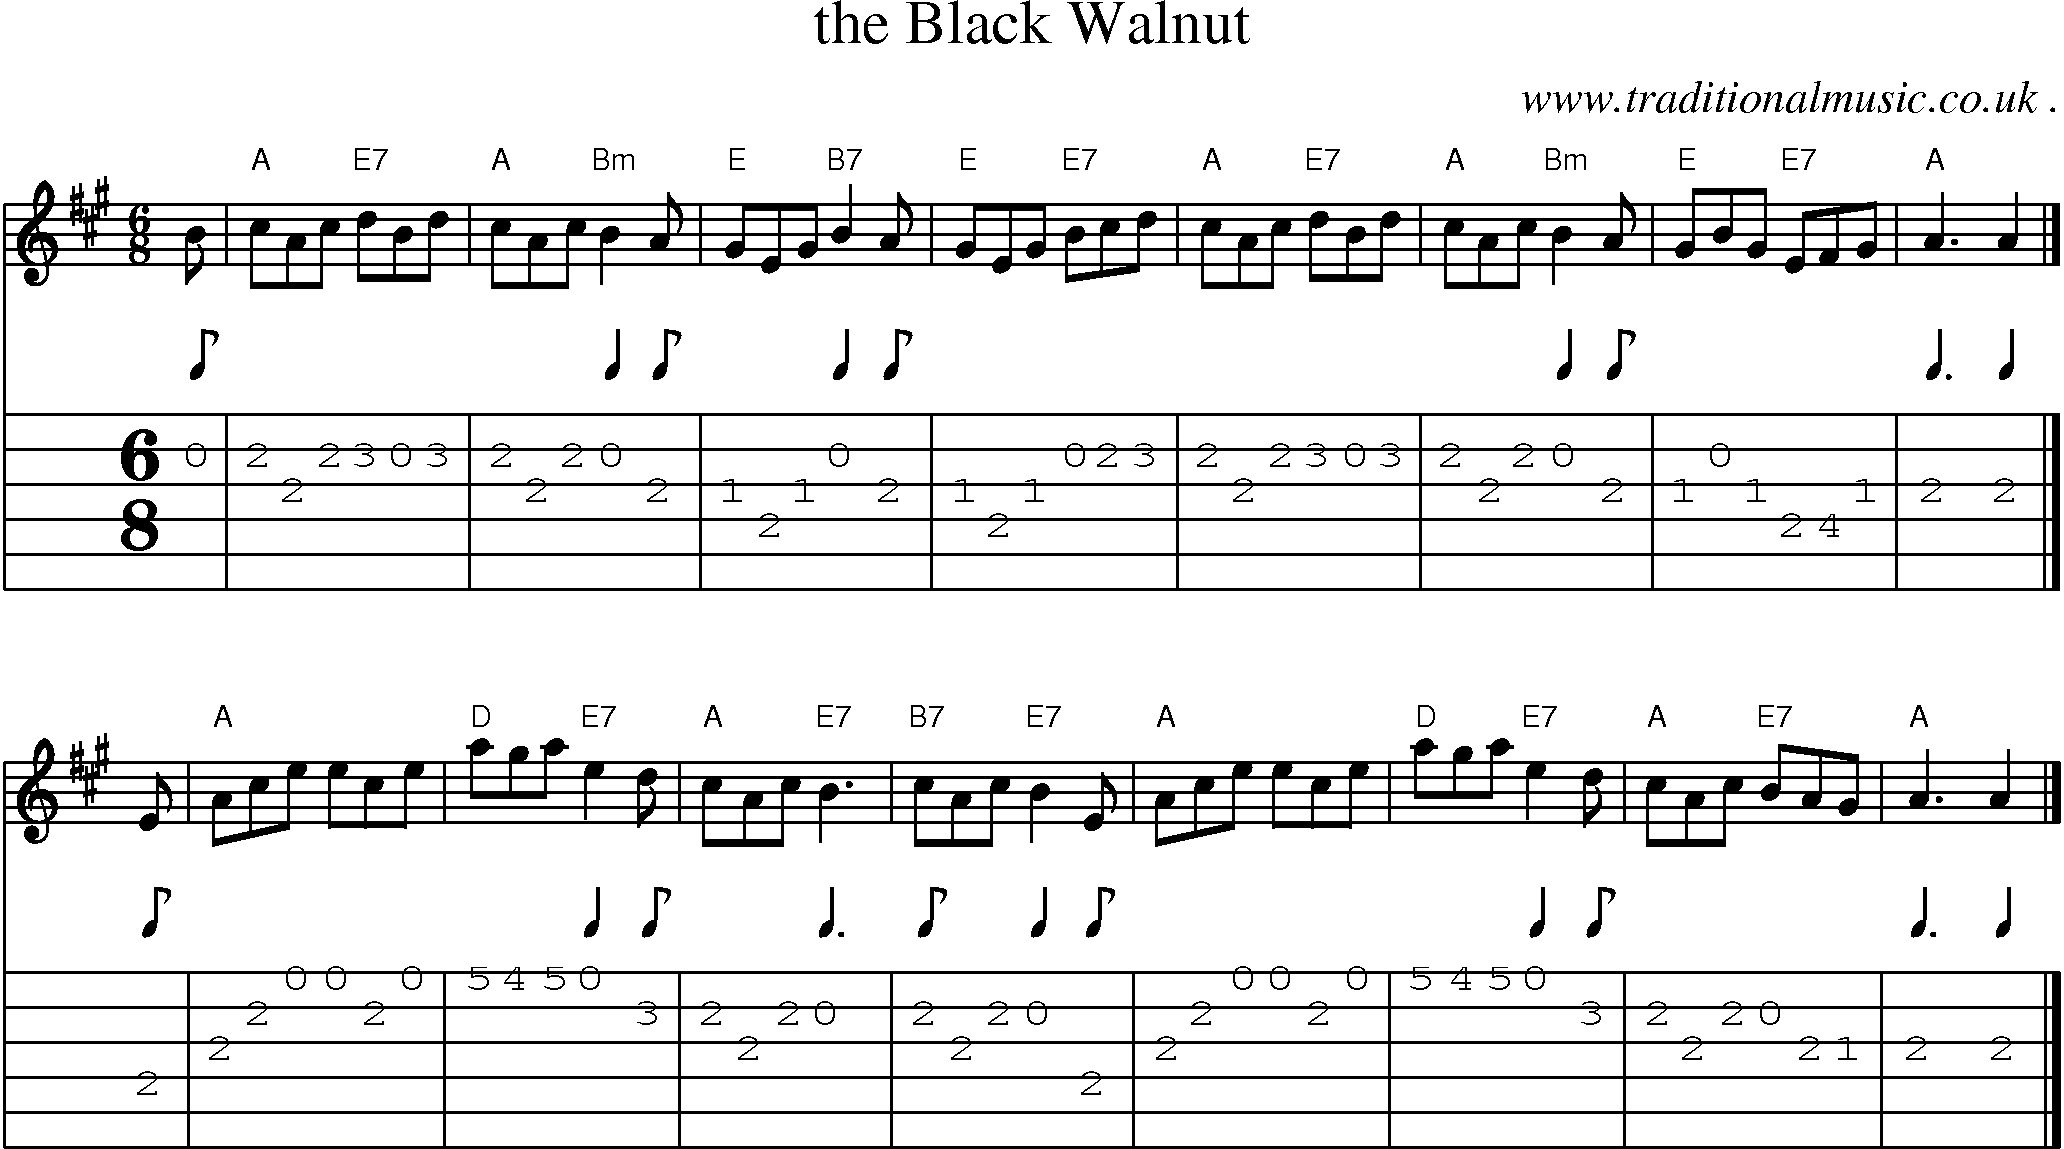 Sheet-music  score, Chords and Guitar Tabs for The Black Walnut